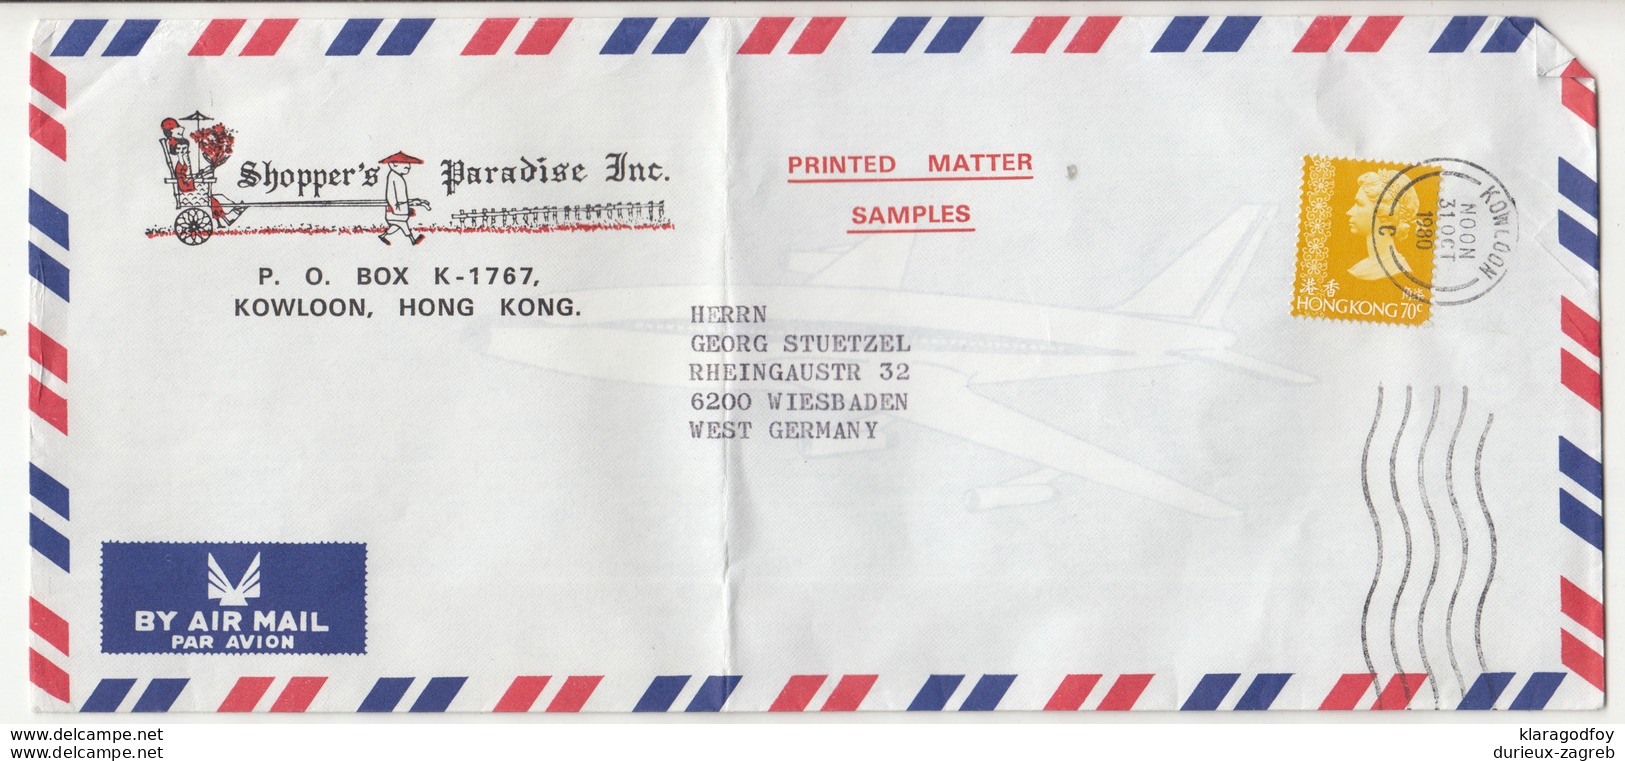 Shopper's Paradise Inc. 4 Company Air Mail Letter Covers Posted To 1980? Germany B200210 - Covers & Documents